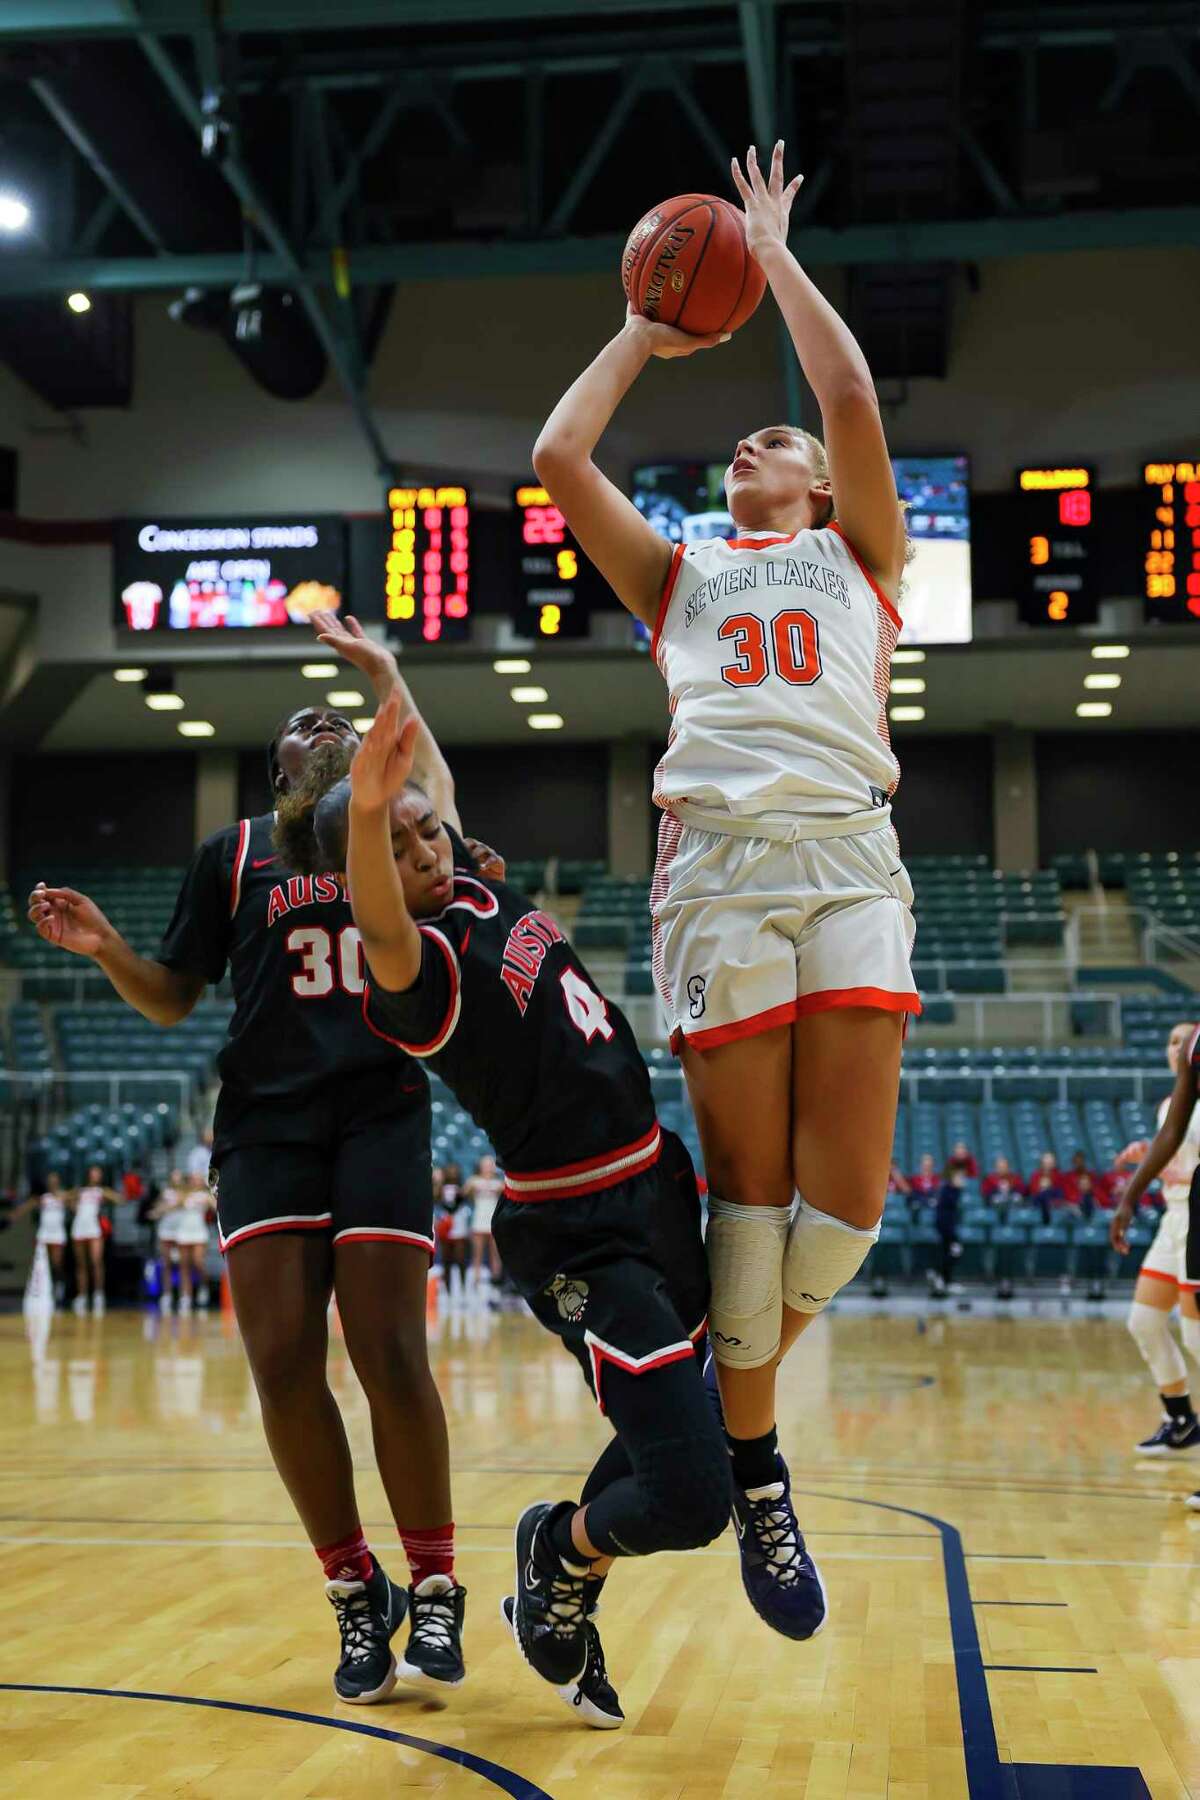 Seven Lakes forward Justice Carlton (30) shoots over Austin guard Aminah Dixon (4) during the first half of a Region III-6A quarterfinals game between the Seven Lakes Spartans and Austin Bulldogs, Tuesday, Feb. 22, 2022, at the Merrell Center in Katy.